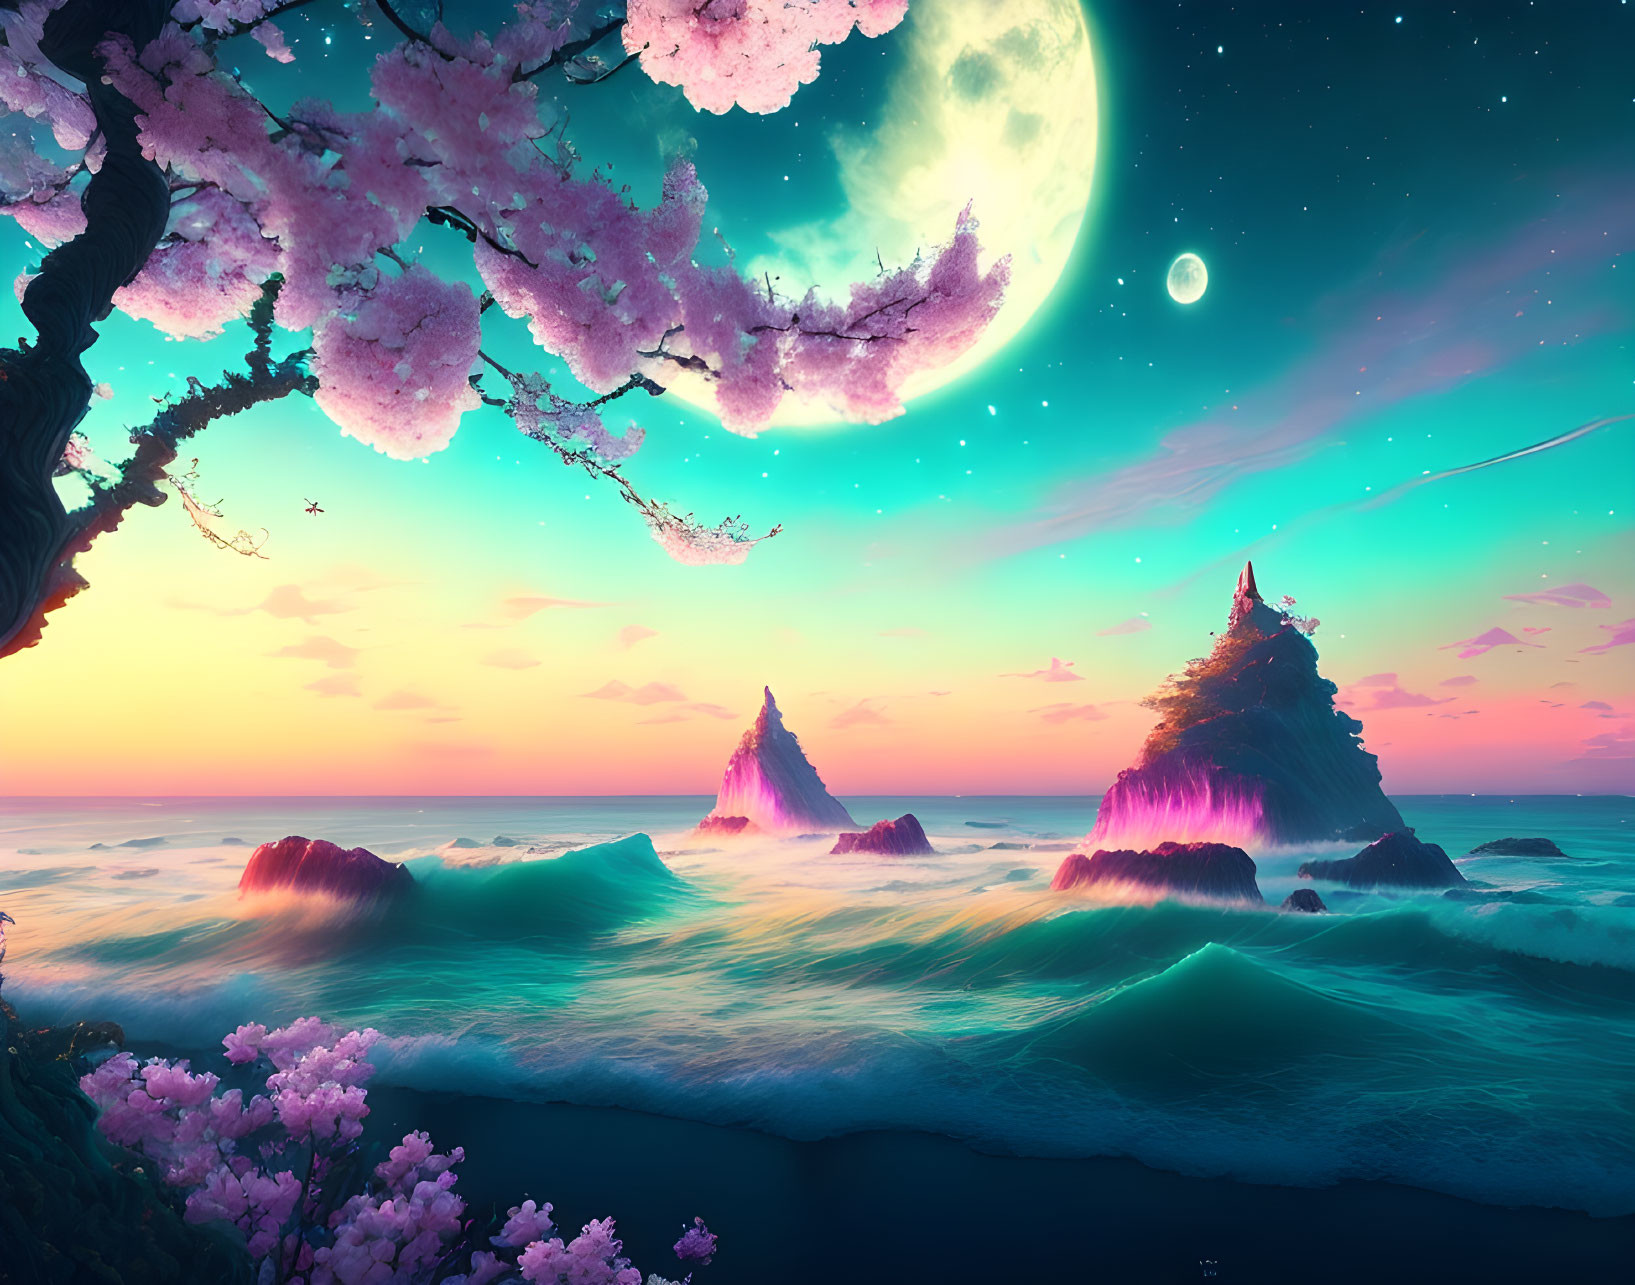 Surreal landscape with cherry blossoms, ocean waves, twin peaks, green moon, and vibrant